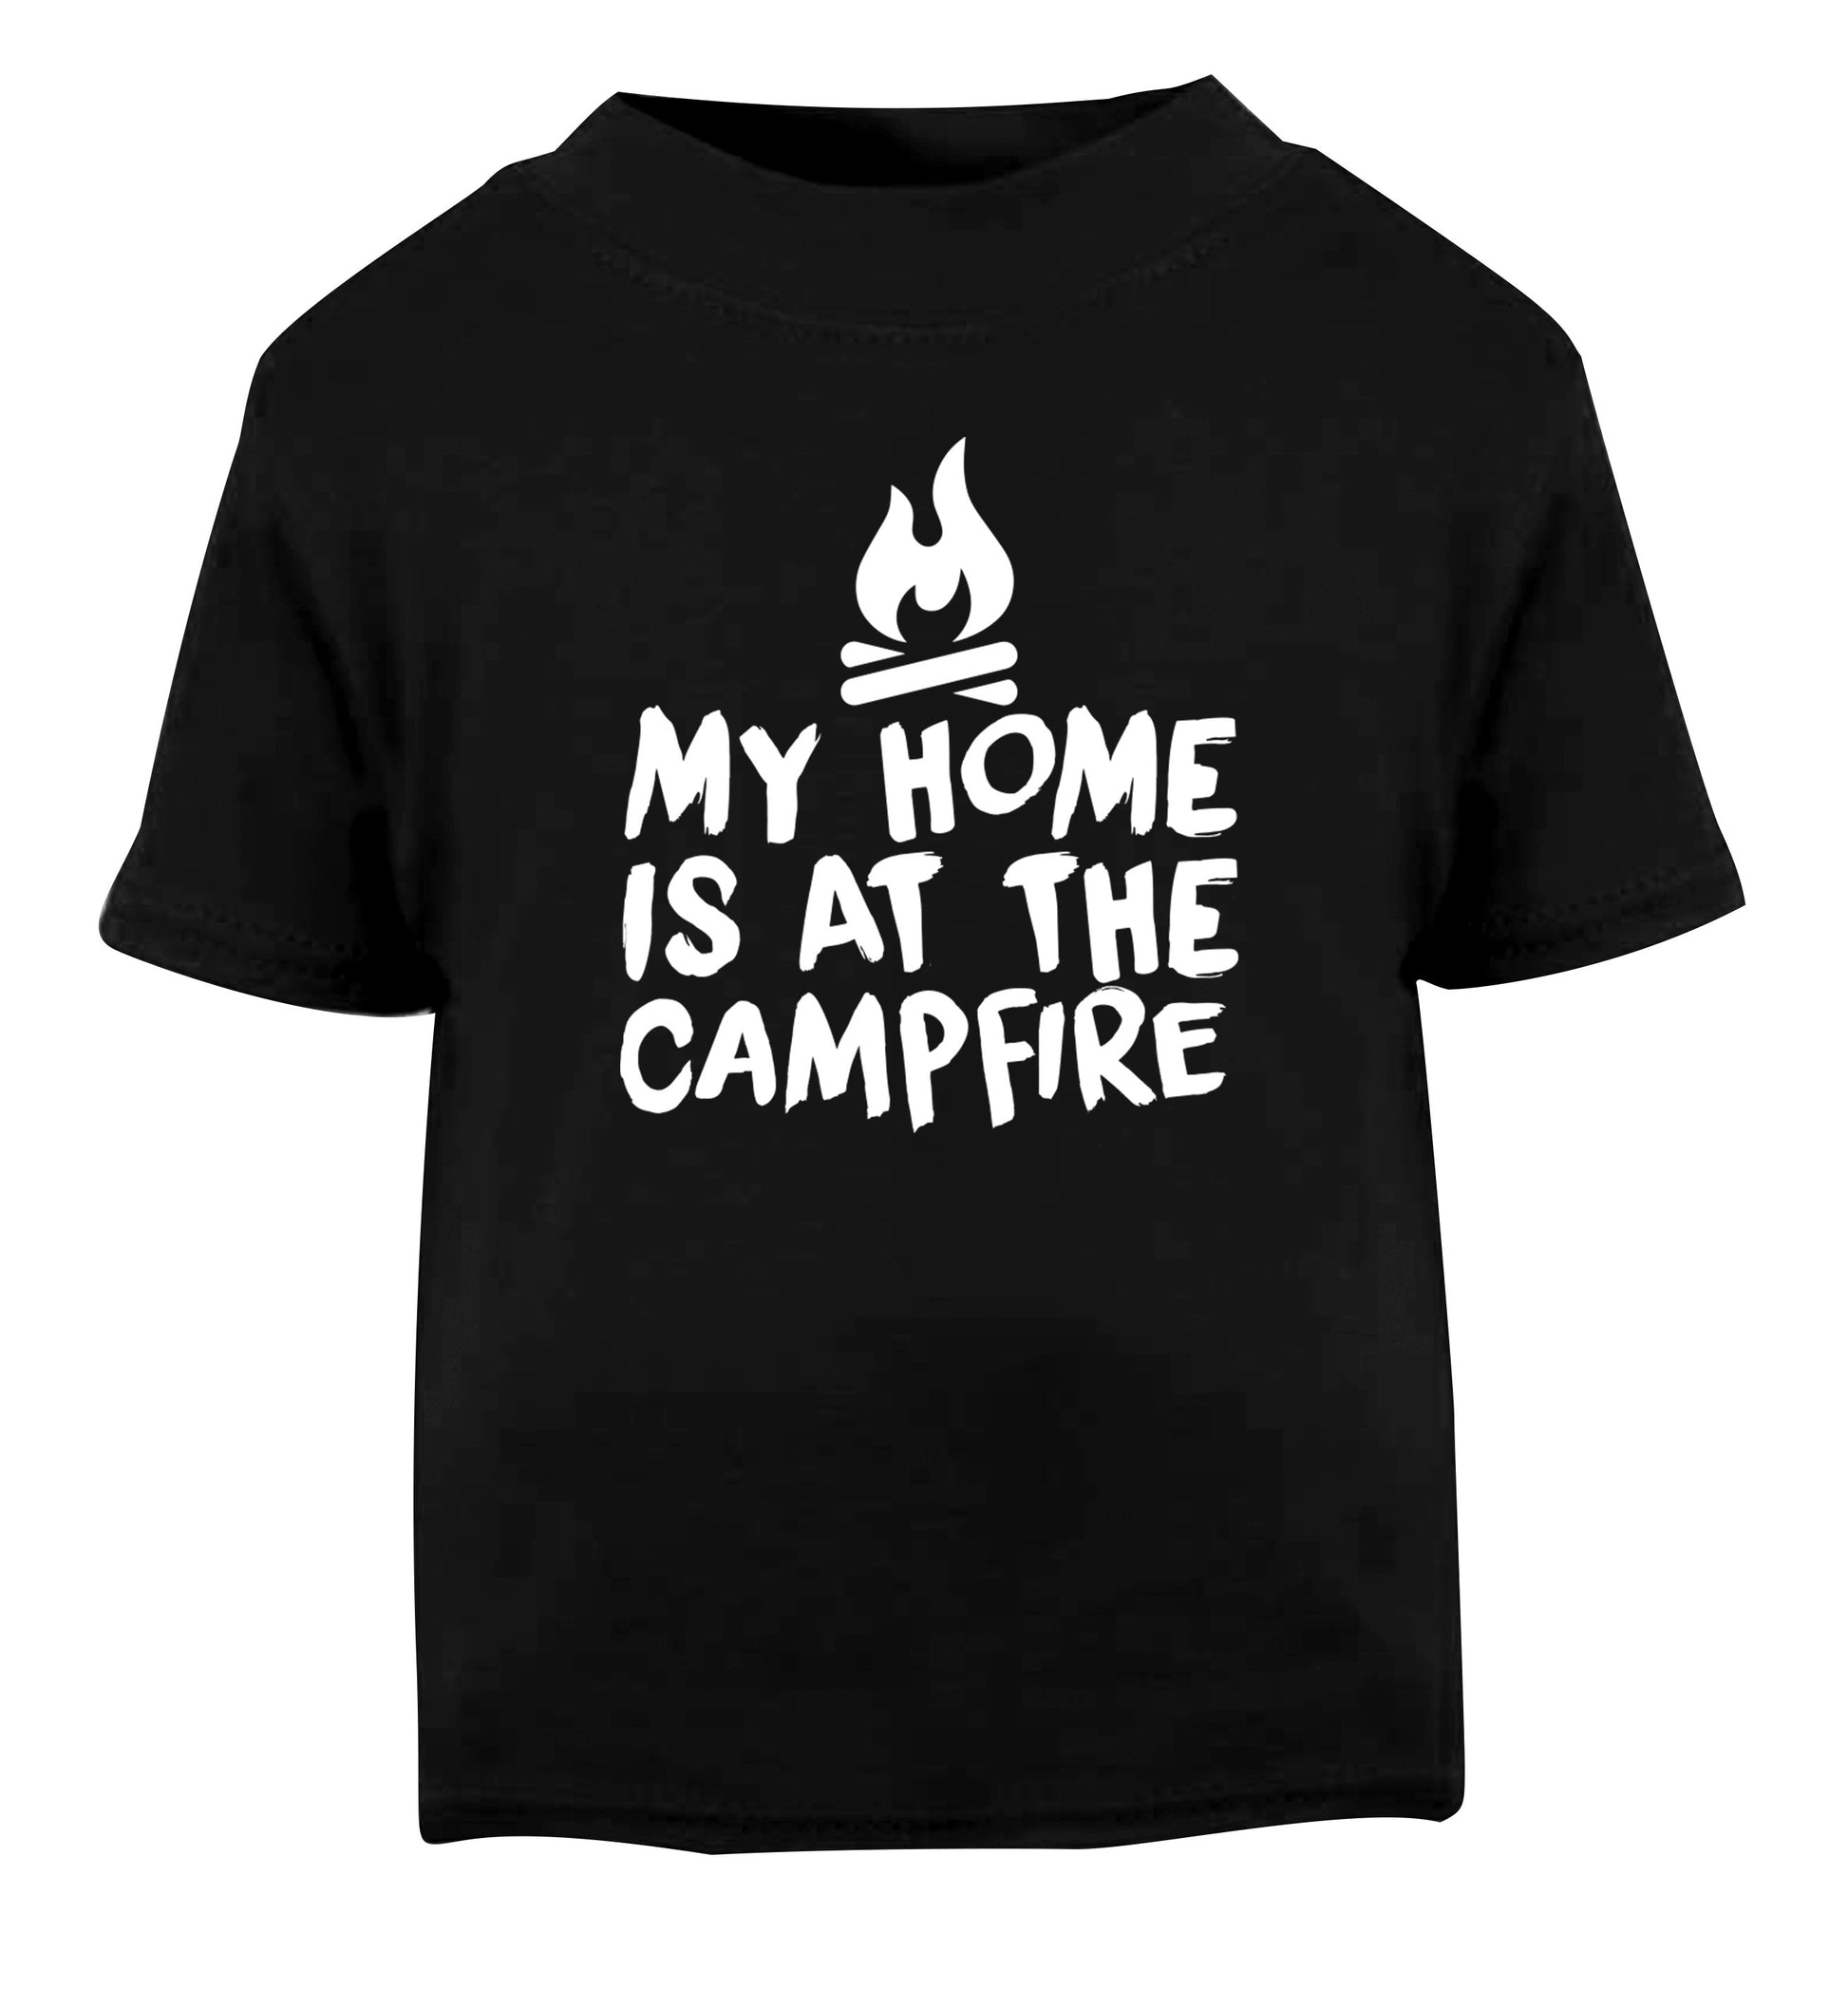 My home is at the campfire Black Baby Toddler Tshirt 2 years